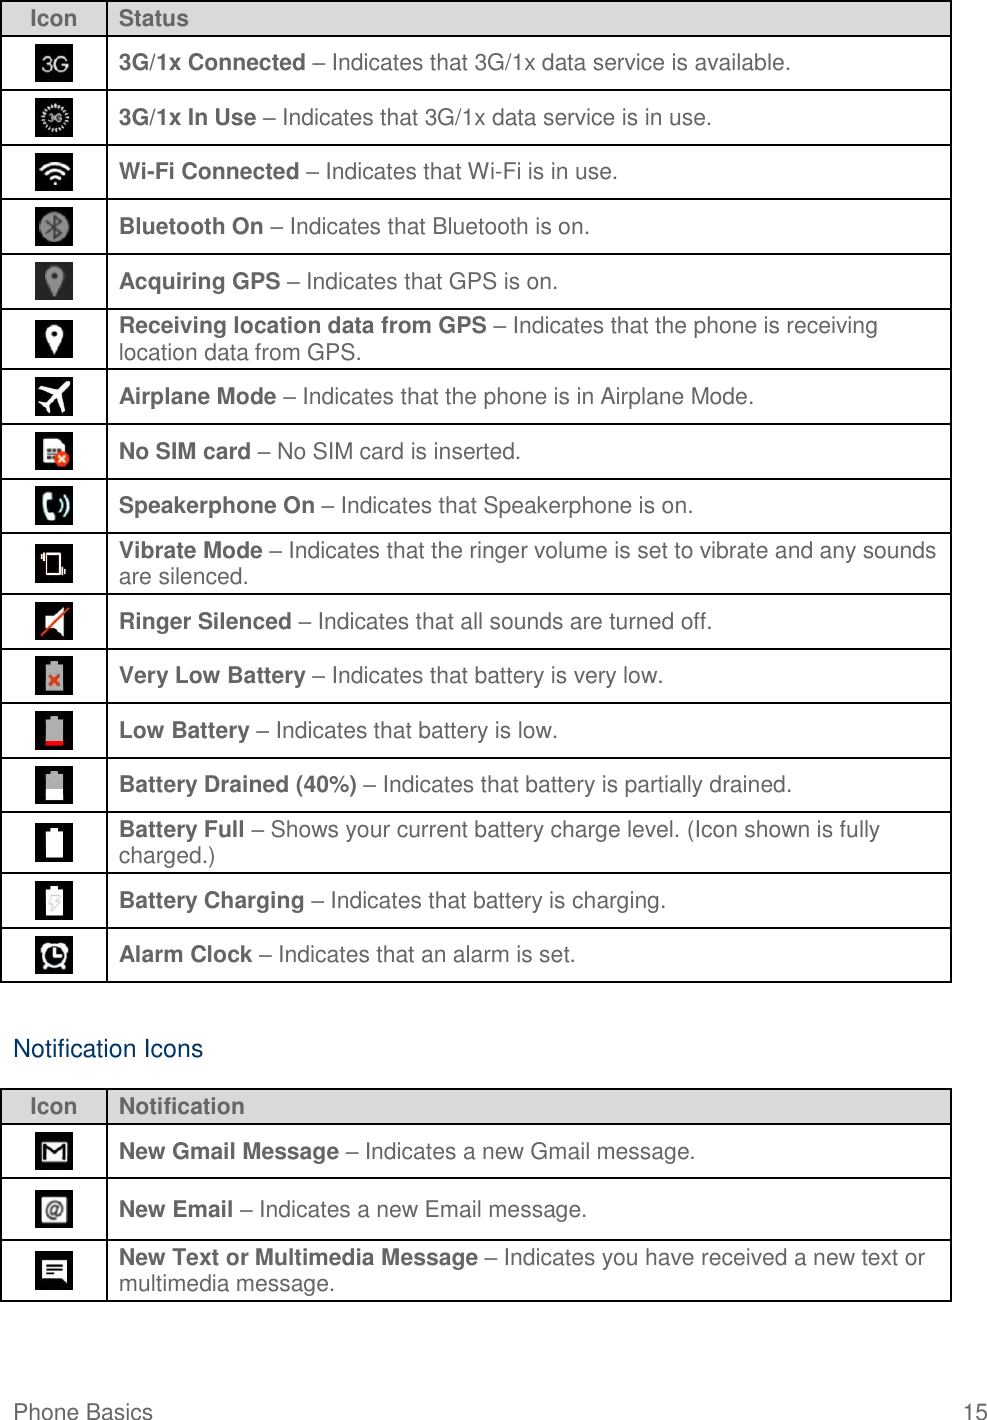 Phone Basics  15 Icon Status  3G/1x Connected – Indicates that 3G/1x data service is available.  3G/1x In Use – Indicates that 3G/1x data service is in use.  Wi-Fi Connected – Indicates that Wi-Fi is in use.  Bluetooth On – Indicates that Bluetooth is on.  Acquiring GPS – Indicates that GPS is on.   Receiving location data from GPS – Indicates that the phone is receiving location data from GPS.  Airplane Mode – Indicates that the phone is in Airplane Mode.  No SIM card – No SIM card is inserted.  Speakerphone On – Indicates that Speakerphone is on.   Vibrate Mode – Indicates that the ringer volume is set to vibrate and any sounds are silenced.   Ringer Silenced – Indicates that all sounds are turned off.   Very Low Battery – Indicates that battery is very low.   Low Battery – Indicates that battery is low.   Battery Drained (40%) – Indicates that battery is partially drained.   Battery Full – Shows your current battery charge level. (Icon shown is fully charged.)   Battery Charging – Indicates that battery is charging.   Alarm Clock – Indicates that an alarm is set.   Notification Icons Icon Notification  New Gmail Message – Indicates a new Gmail message.   New Email – Indicates a new Email message.   New Text or Multimedia Message – Indicates you have received a new text or multimedia message.  